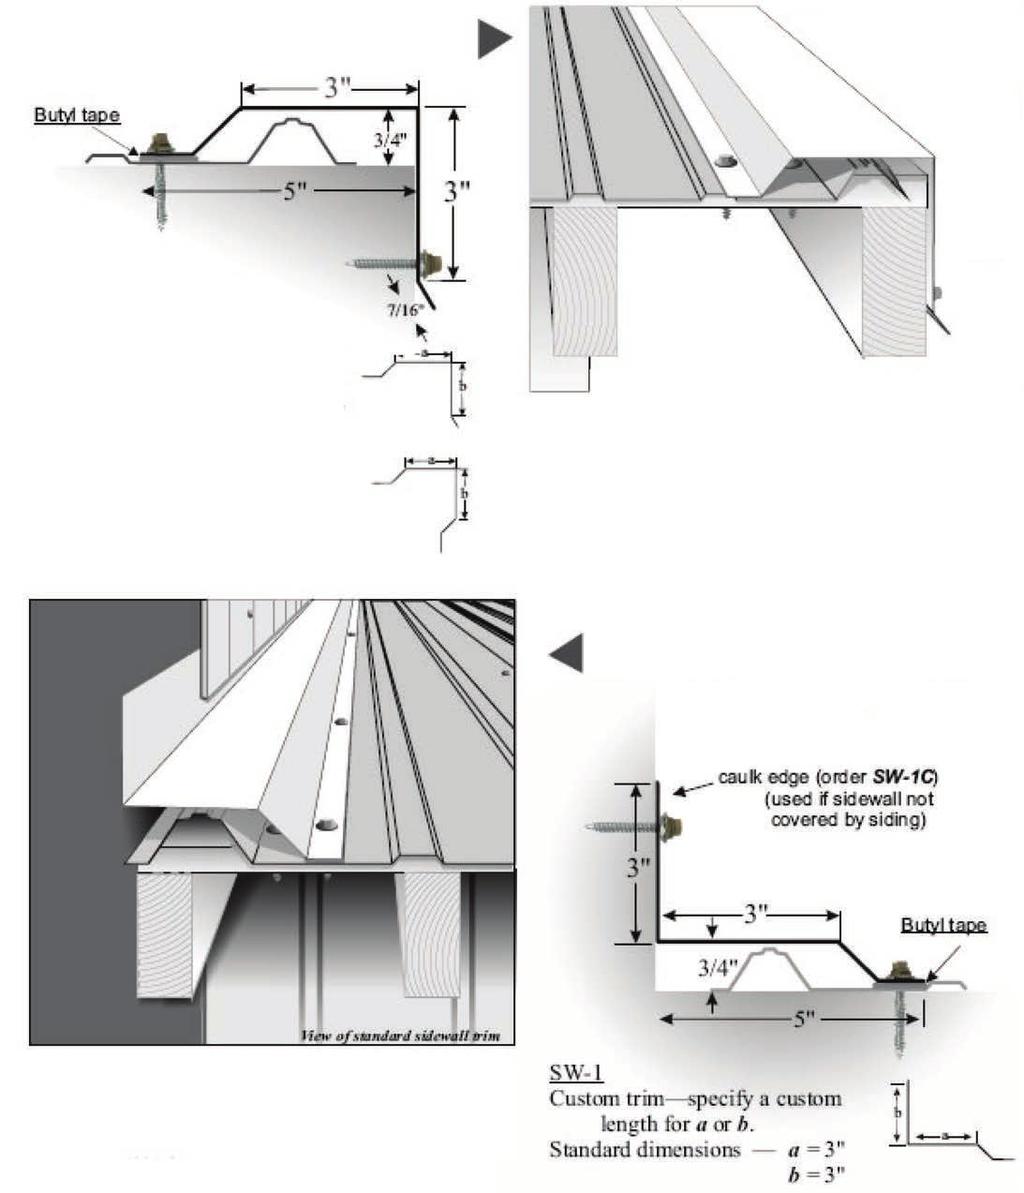 Ridge Cap The Ridge Cap is used to seal the point at which two upward slopes meet. This can be both along the ridge of the roof as well as a covering for a hip.